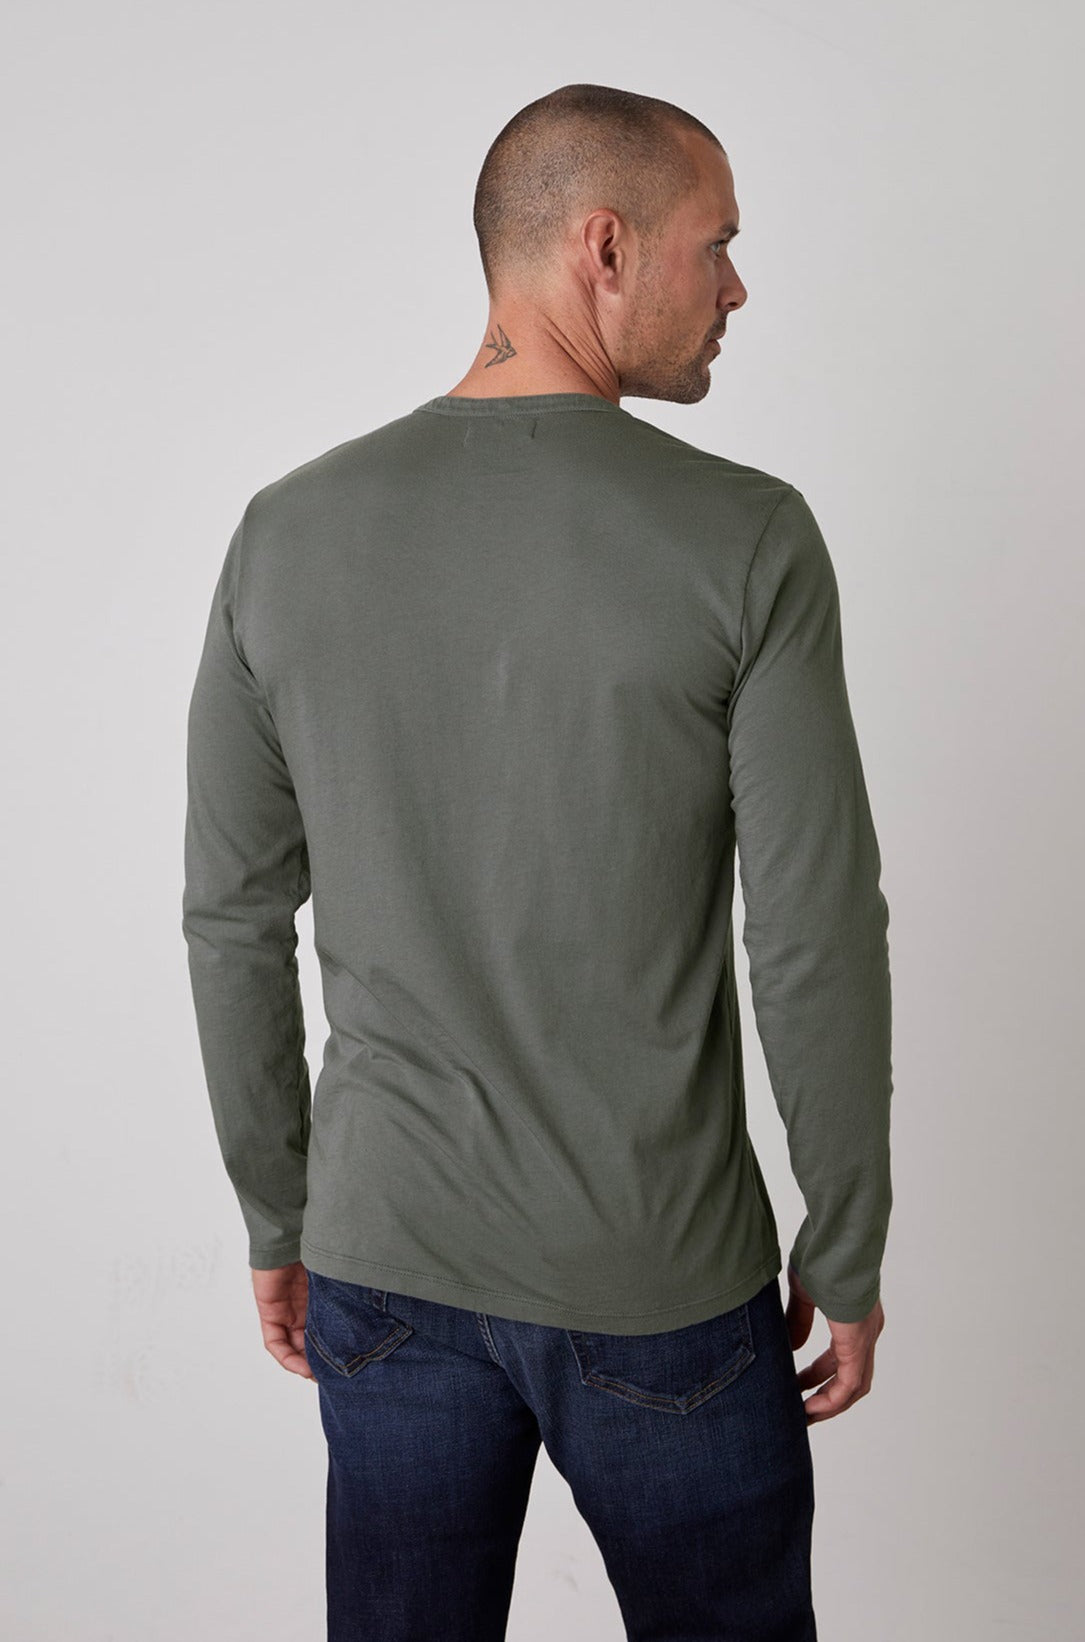 A person with a shaved head and a small neck tattoo is wearing a lightweight, long-sleeved green ALVARO HENLEY by Velvet by Graham & Spencer and blue jeans, viewed from the back.-23778972565697